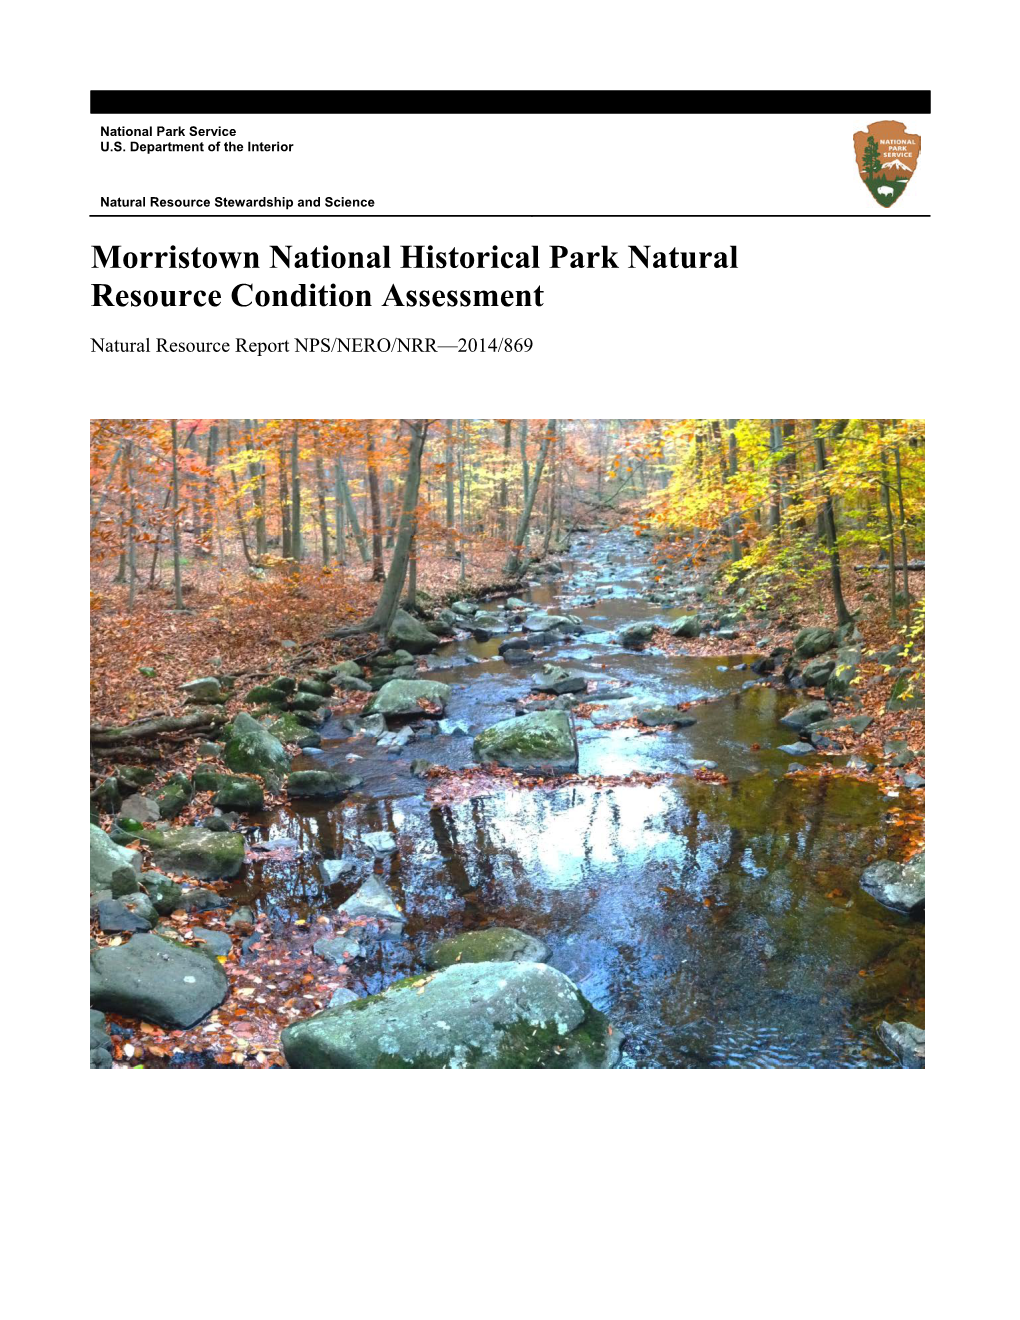 Morristown National Historical Park Natural Resource Condition Assessment